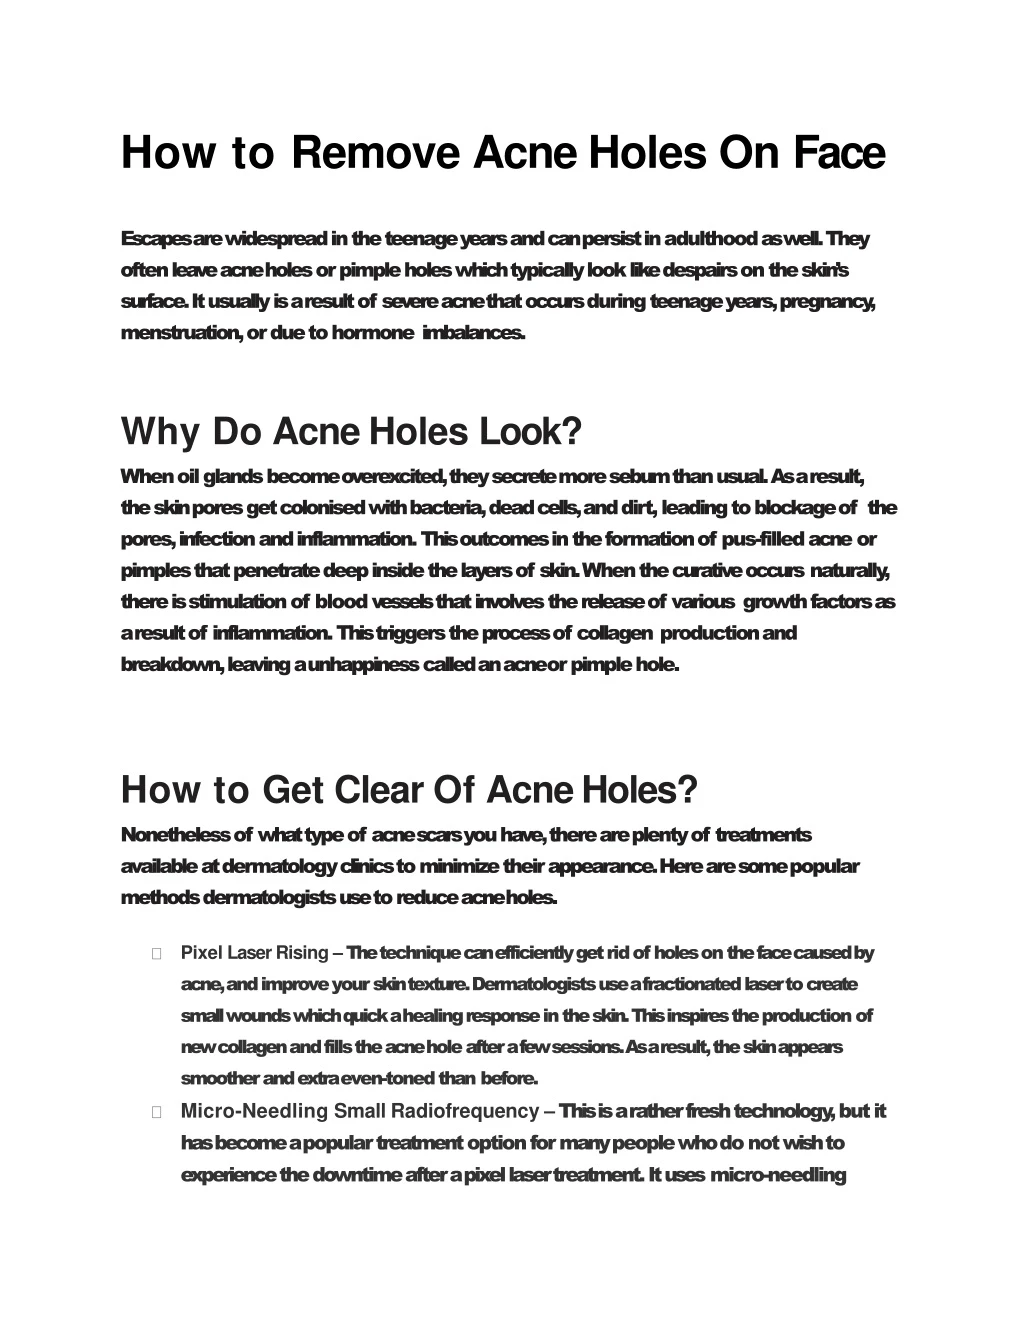 how to remove acne holes on face